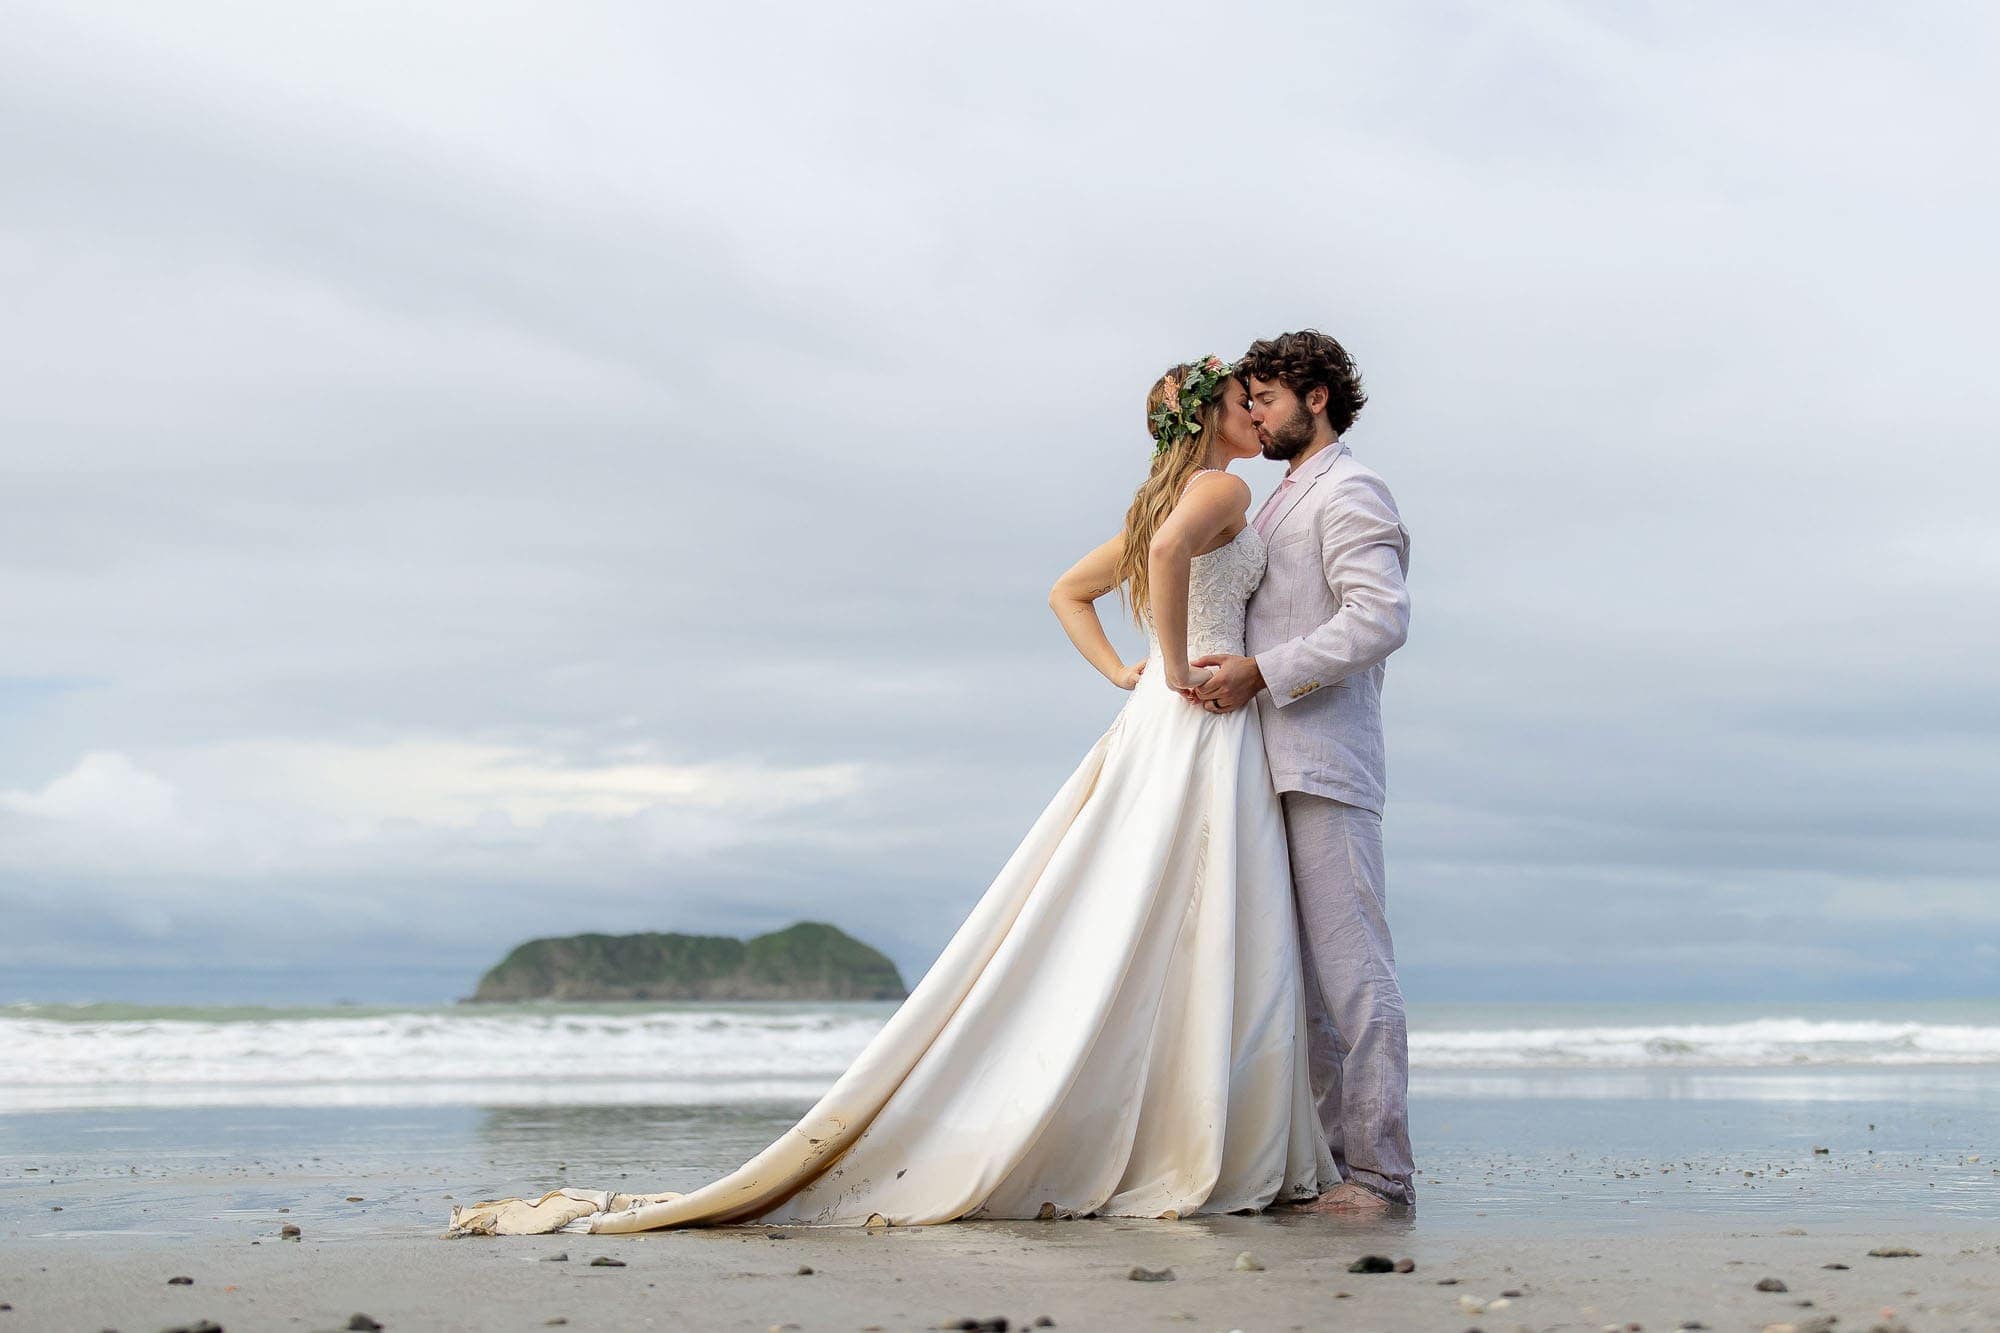 Photos of the bride and groom on the beach for a costa rica wedding getaway